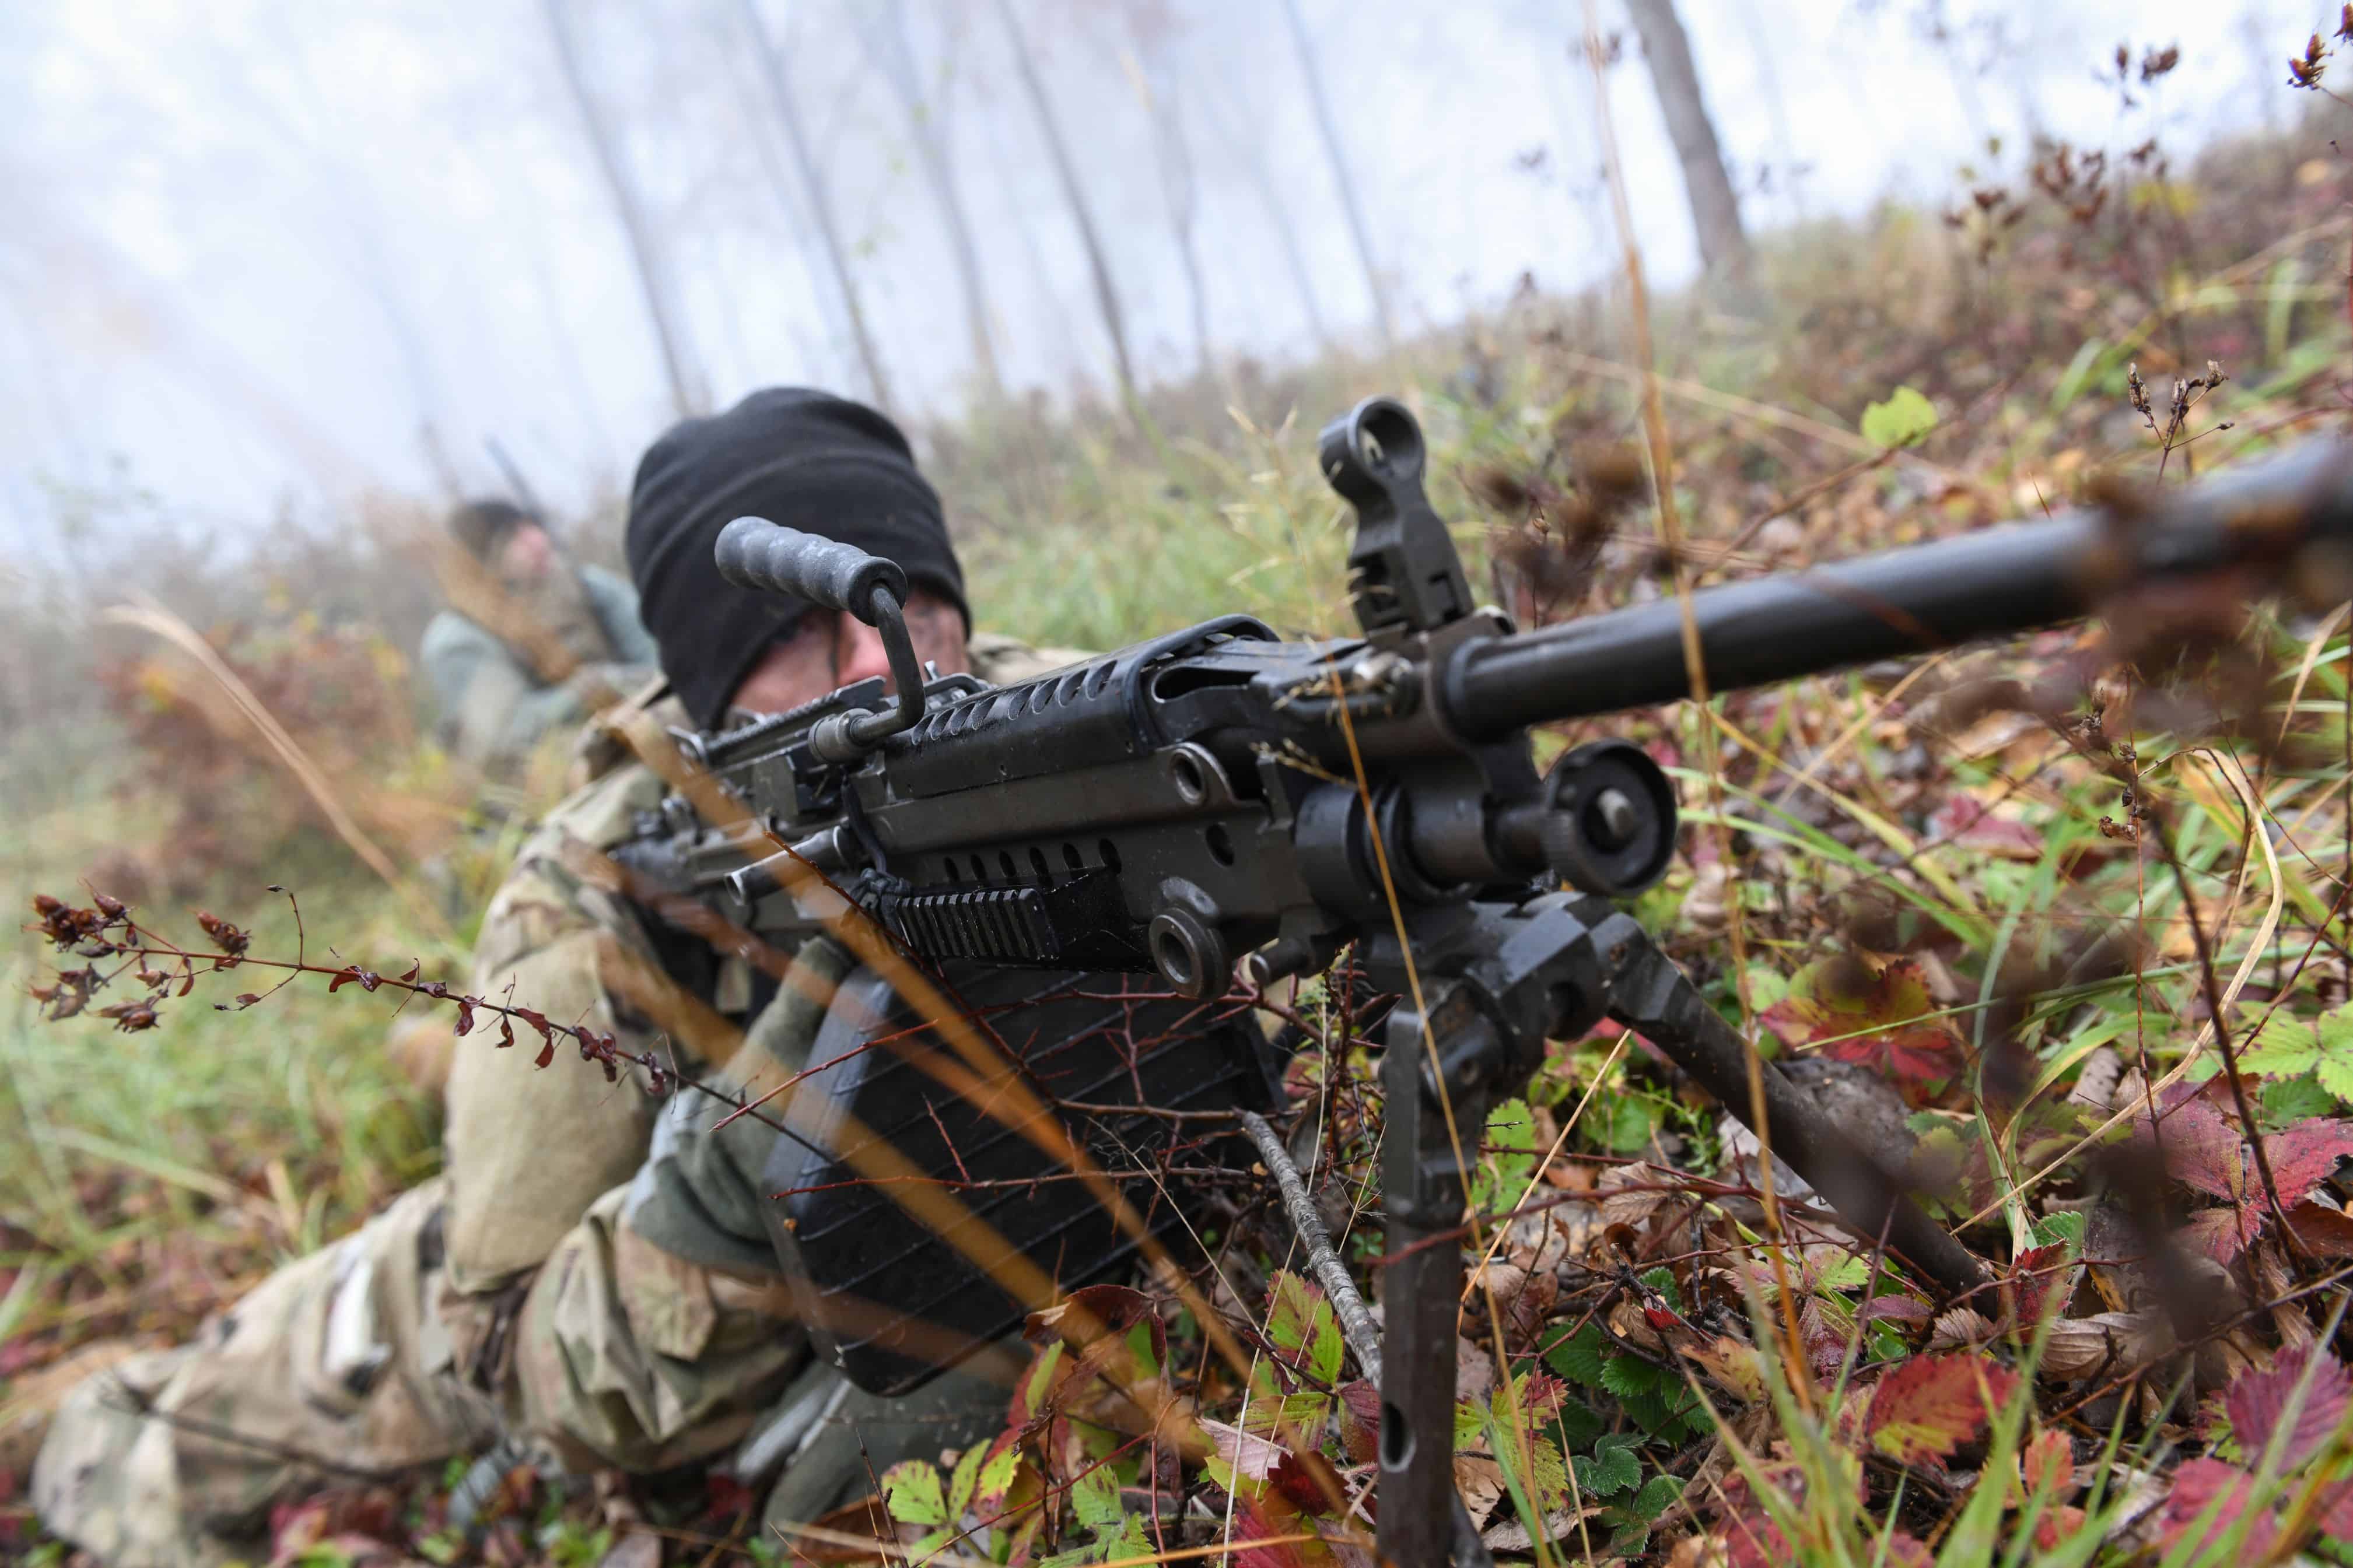 U.S. Army Pfc. Bobby Taylor, a Greenfield, Ind. soldier assigned to the 1st Squadron, 152nd Cavalry Regiment, 76th Infantry Brigade Combat Team, 38th Infantry Division, Indiana Army National Guard, mans an M249 light machine gun during a reconnaissance and surveillance rehearsal exercise